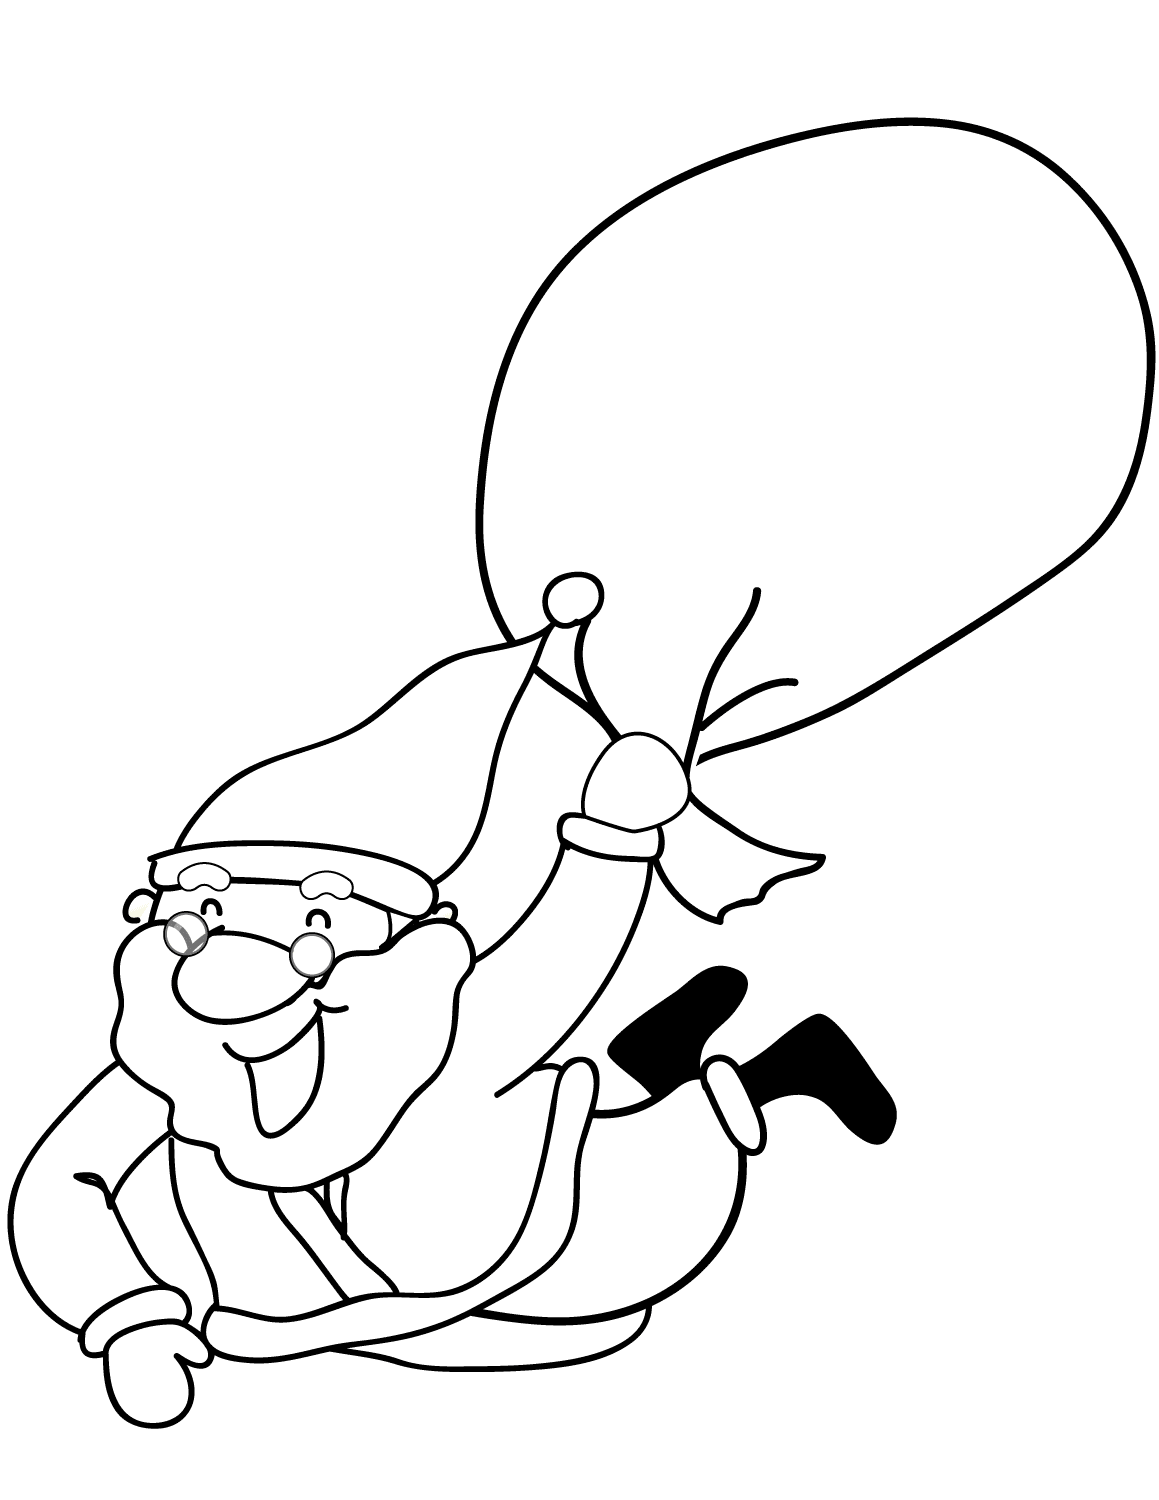 Santa Claus Is Flying Christmas Coloring Page